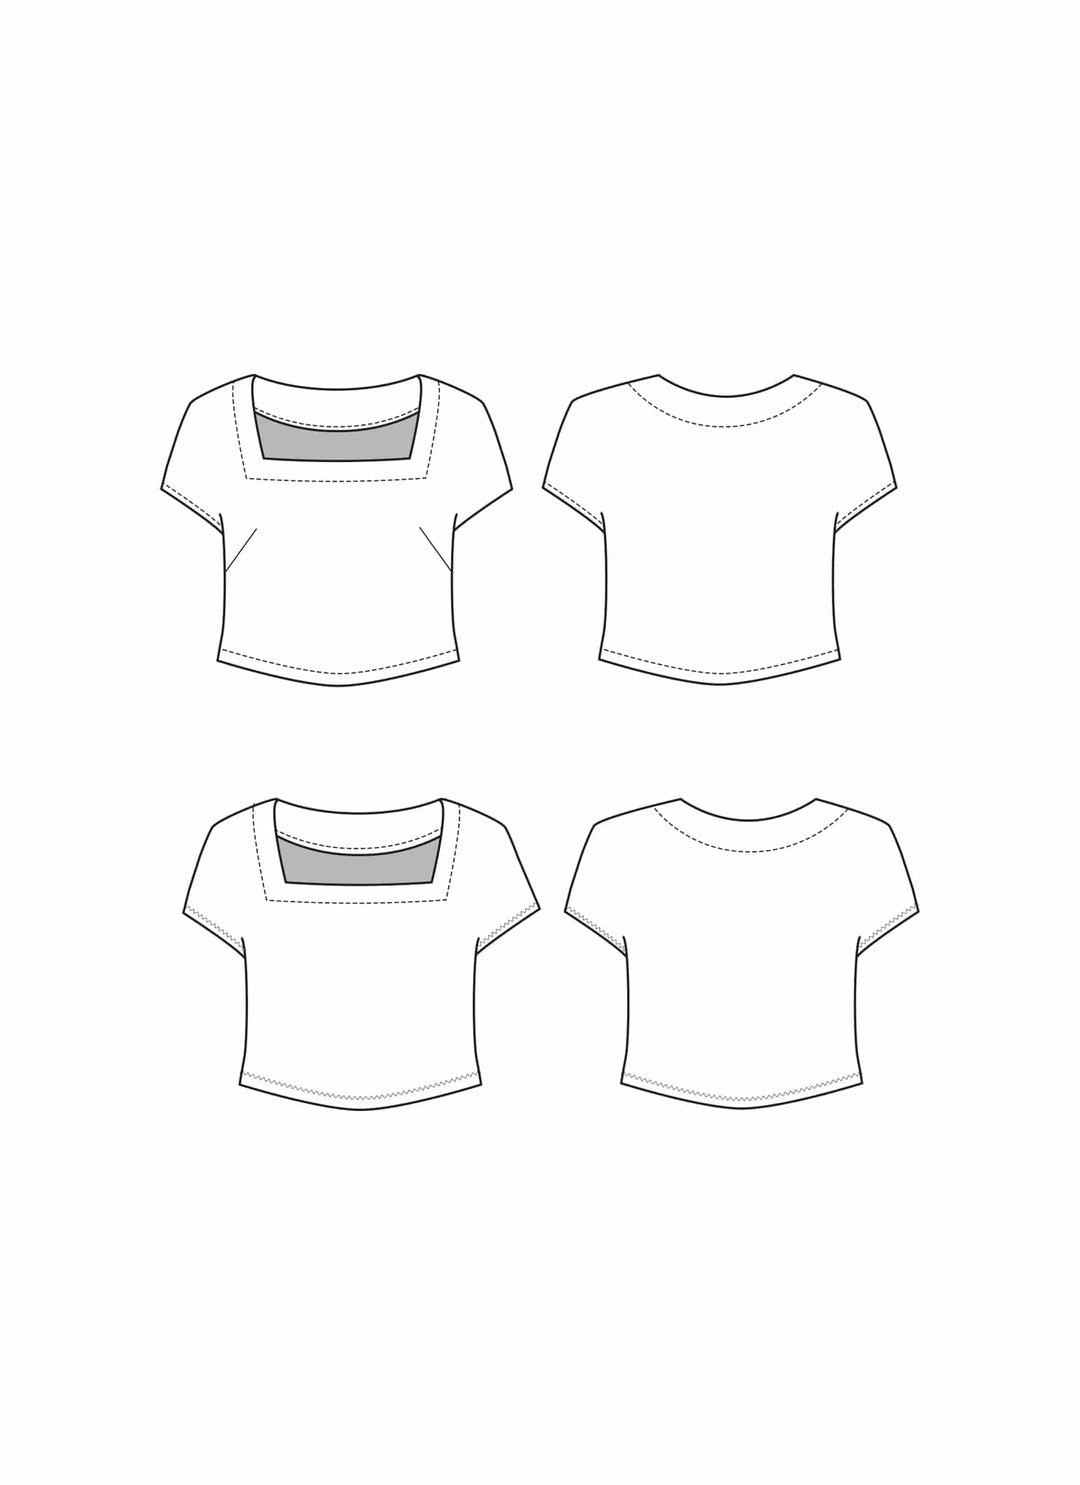 Square Neck Top - Friday Pattern Company - Sizes XS-7X